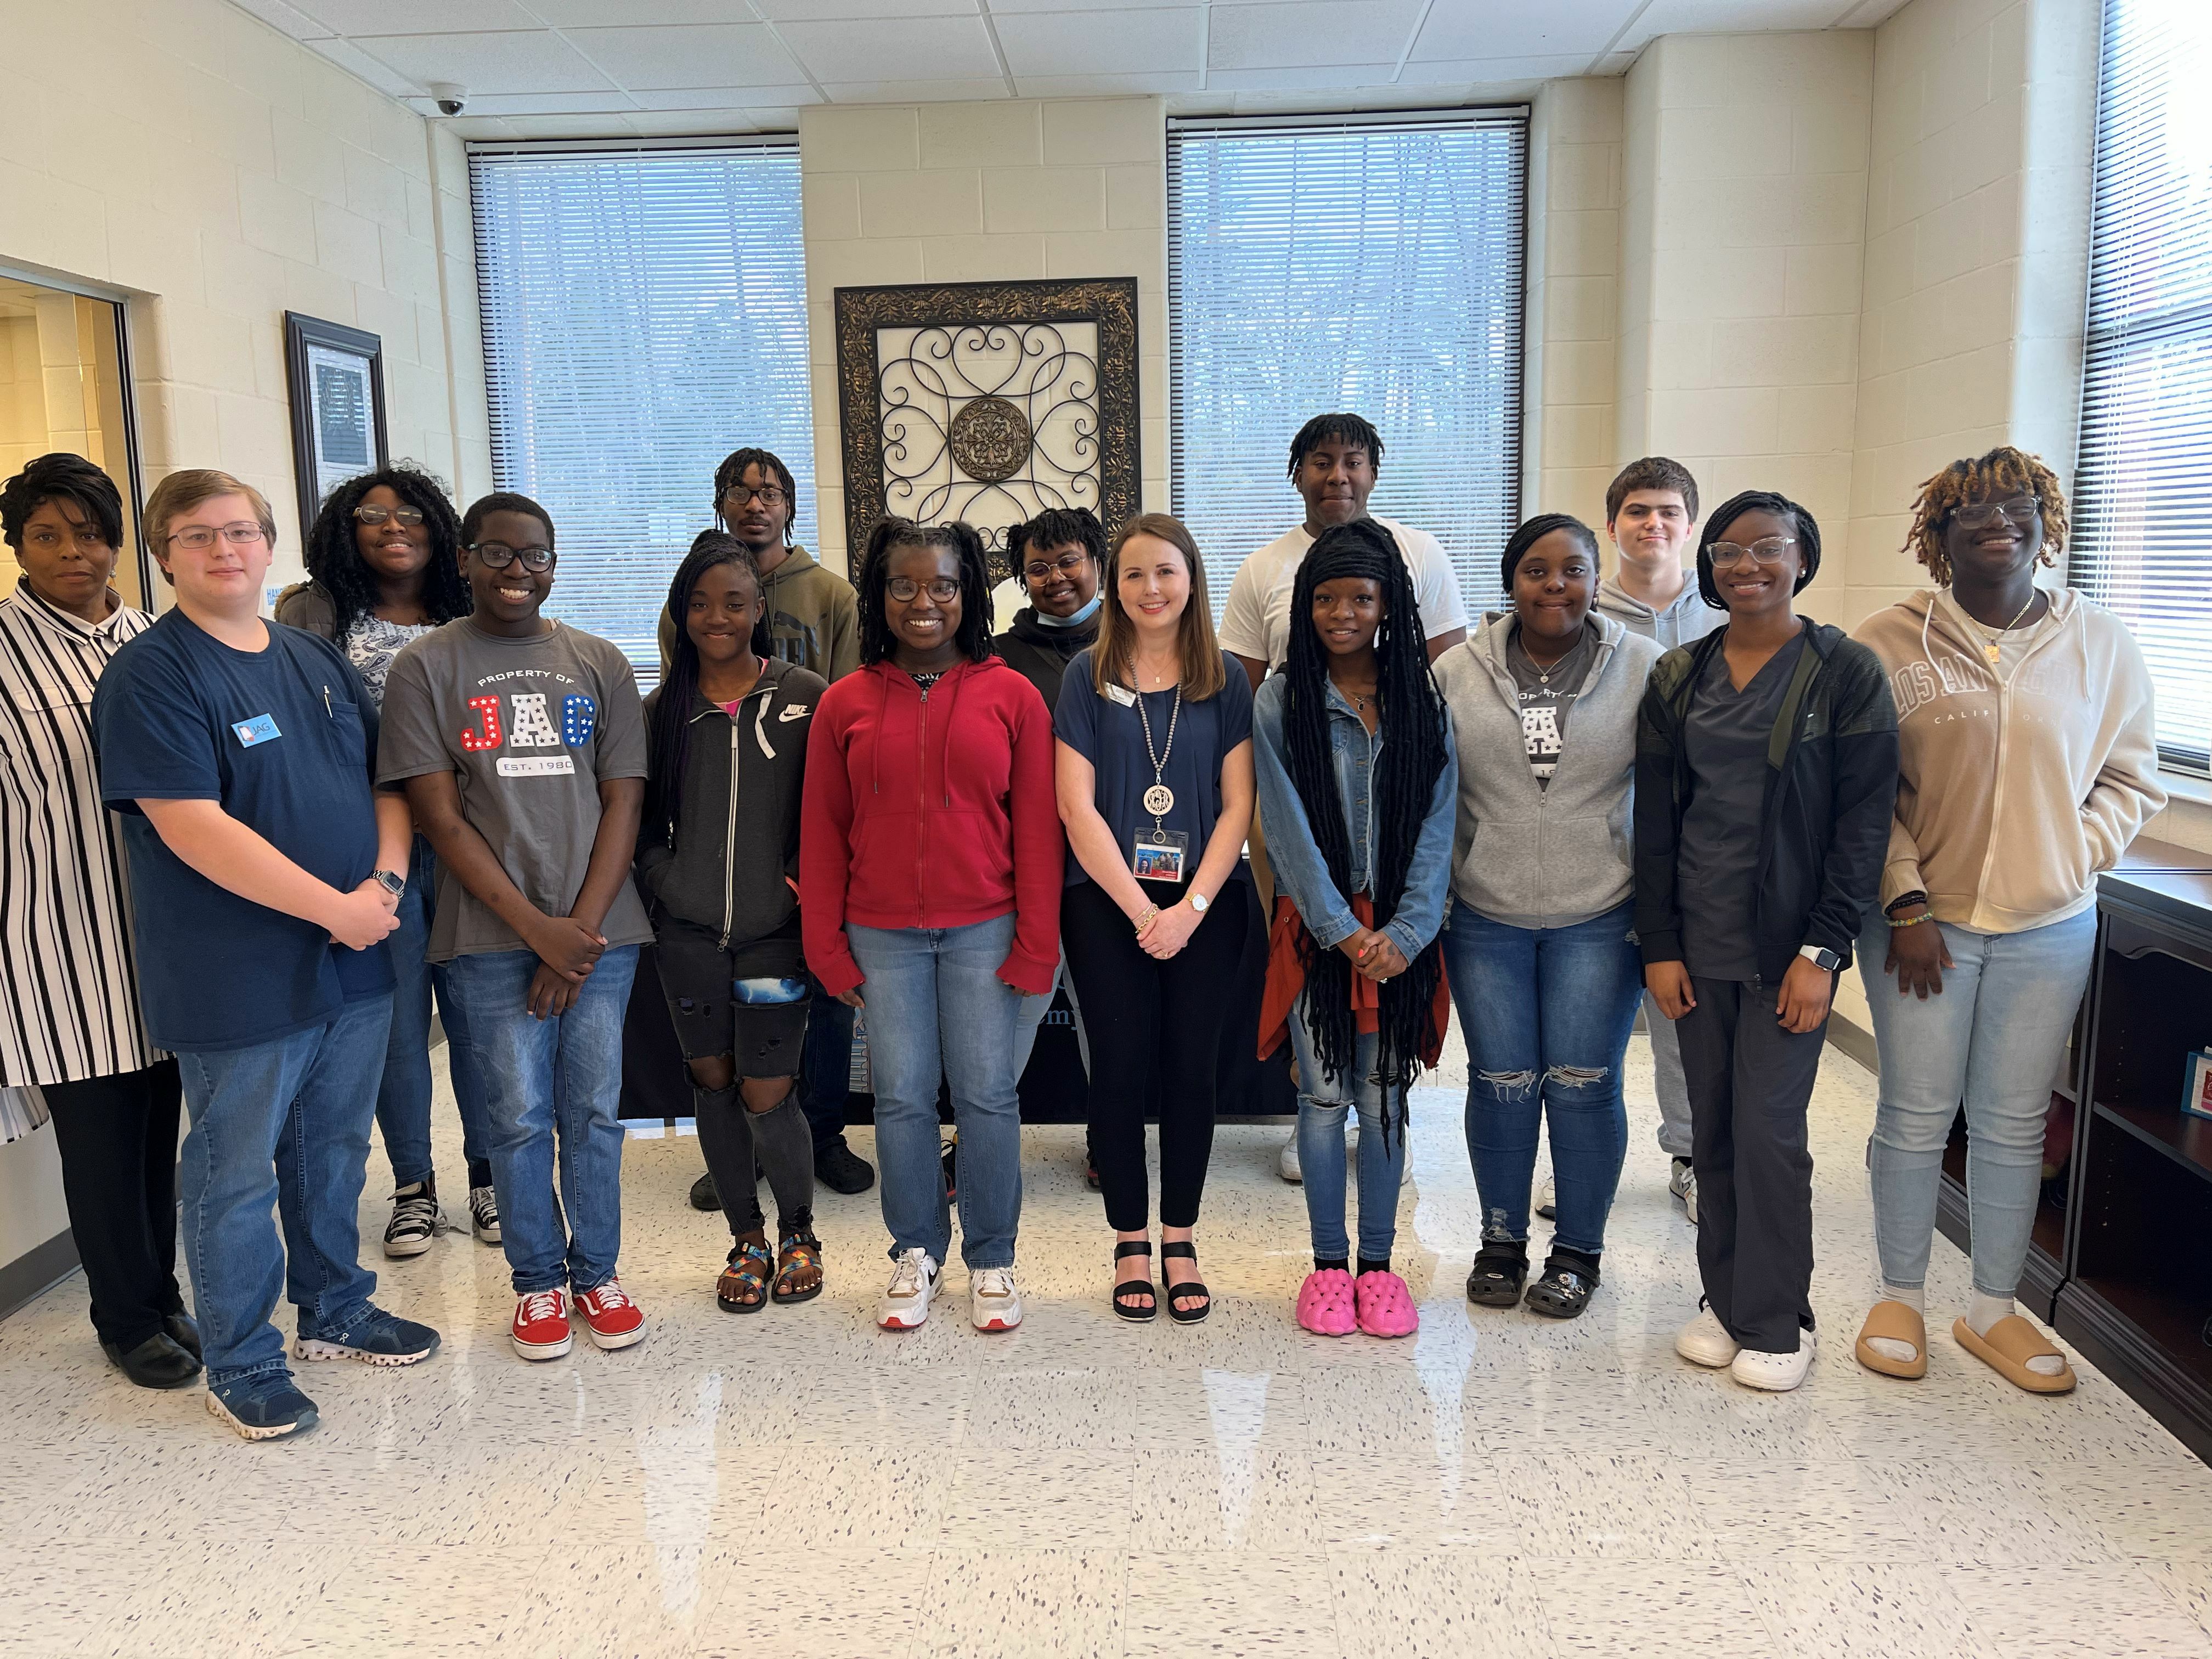 Dr. Annah Rogers (center) with JAG Students from Hale County and Greensboro High Schools